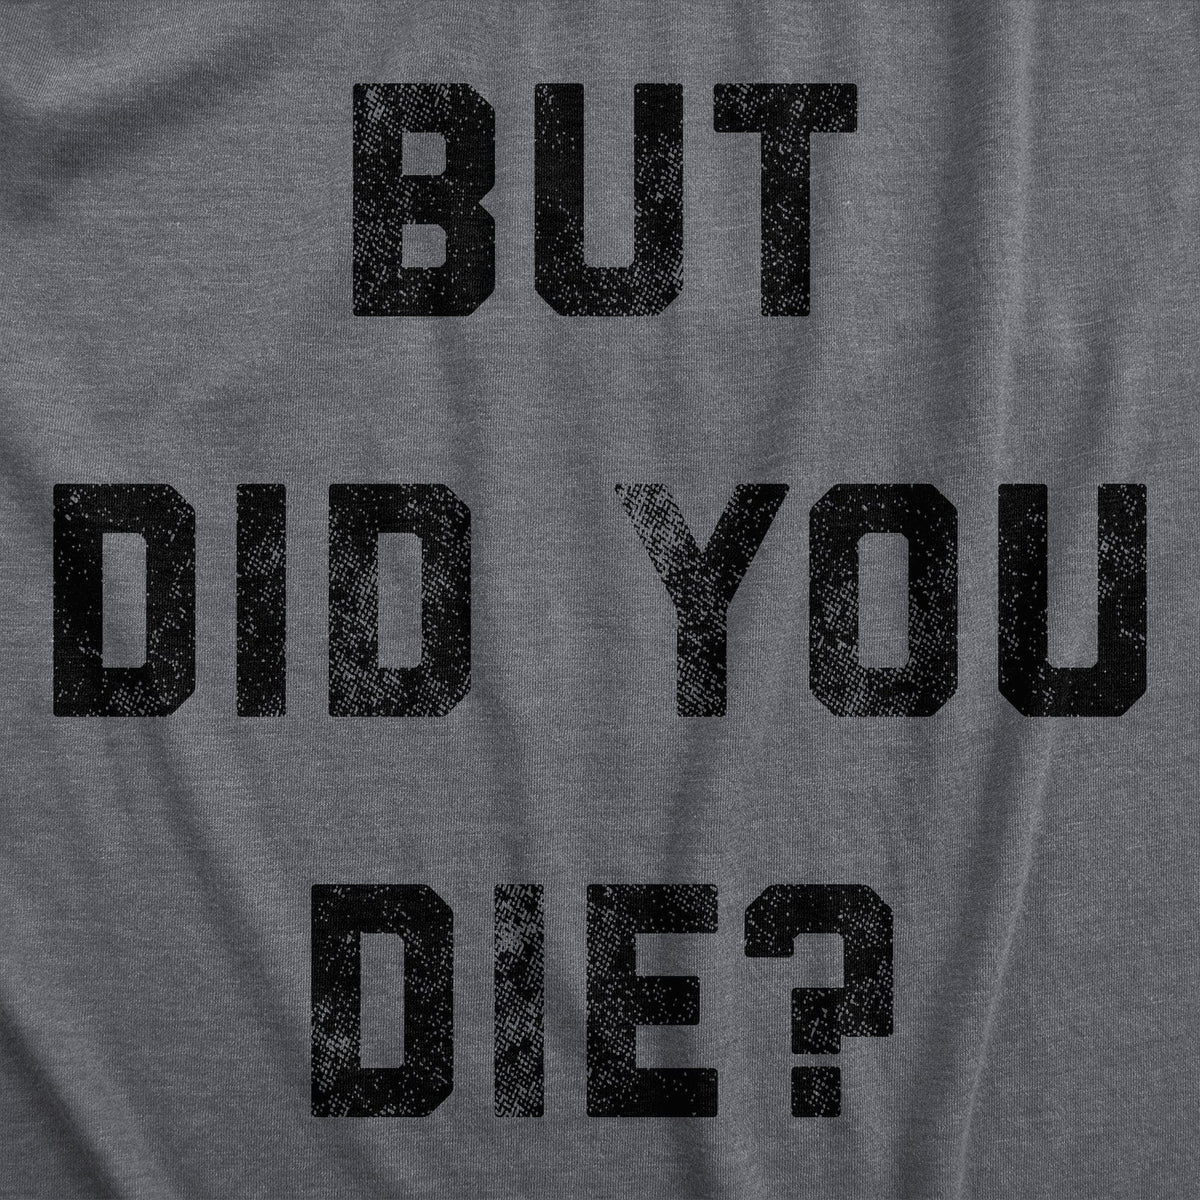 But Did You Die Women&#39;s Tshirt  -  Crazy Dog T-Shirts